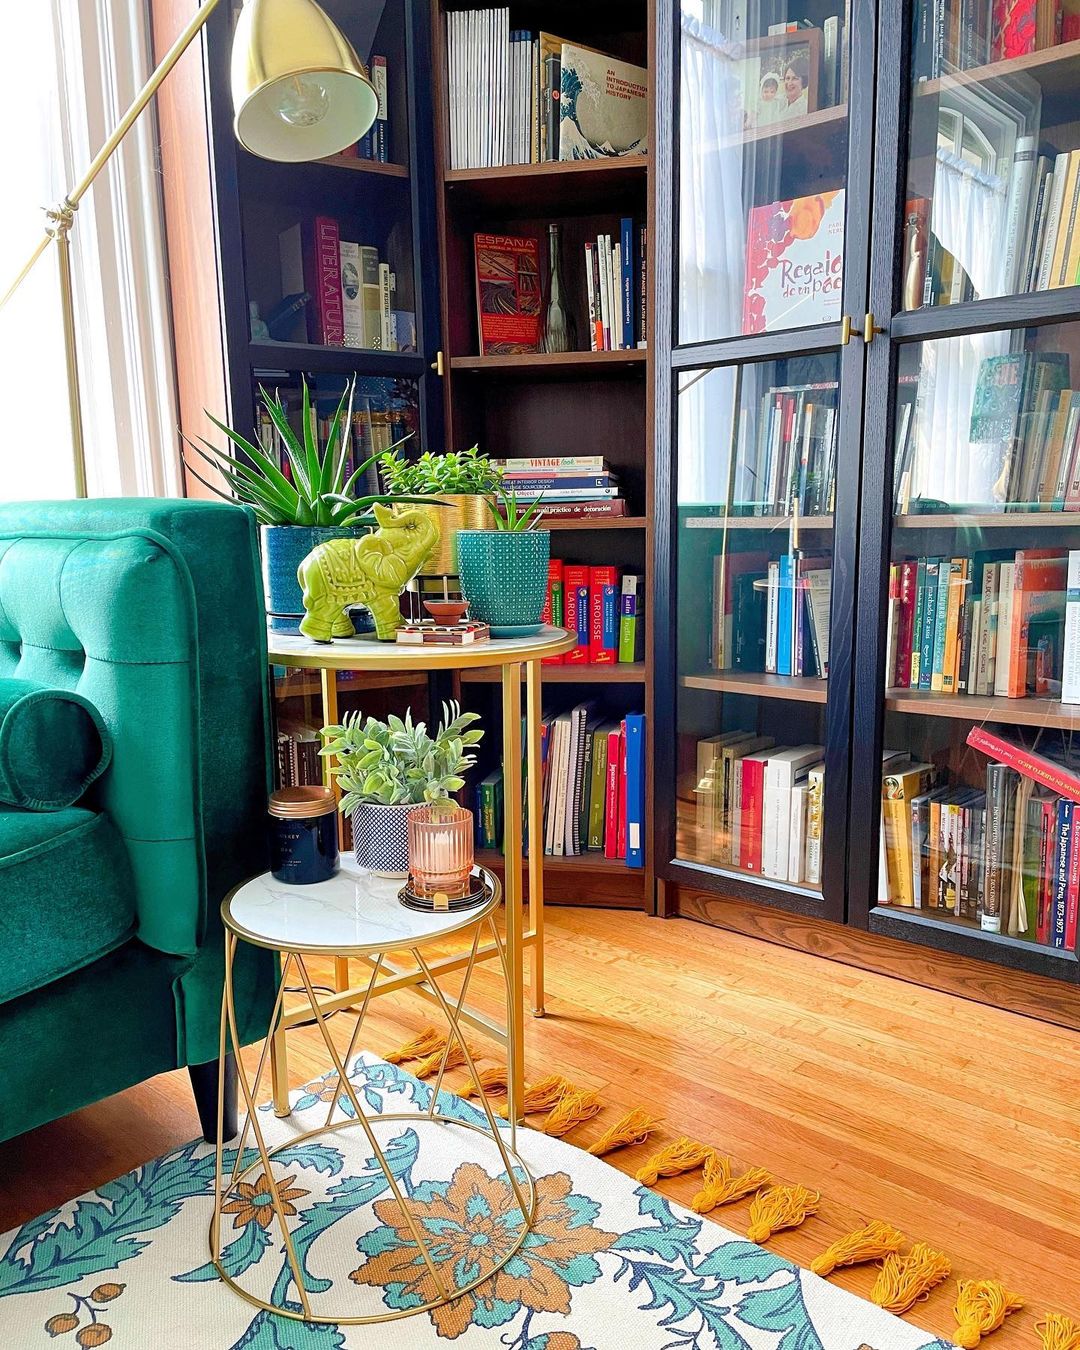 Nesting Tables Next to a Small Green Couch. Photo by Instagram user @ourmodernvictorianitalianate